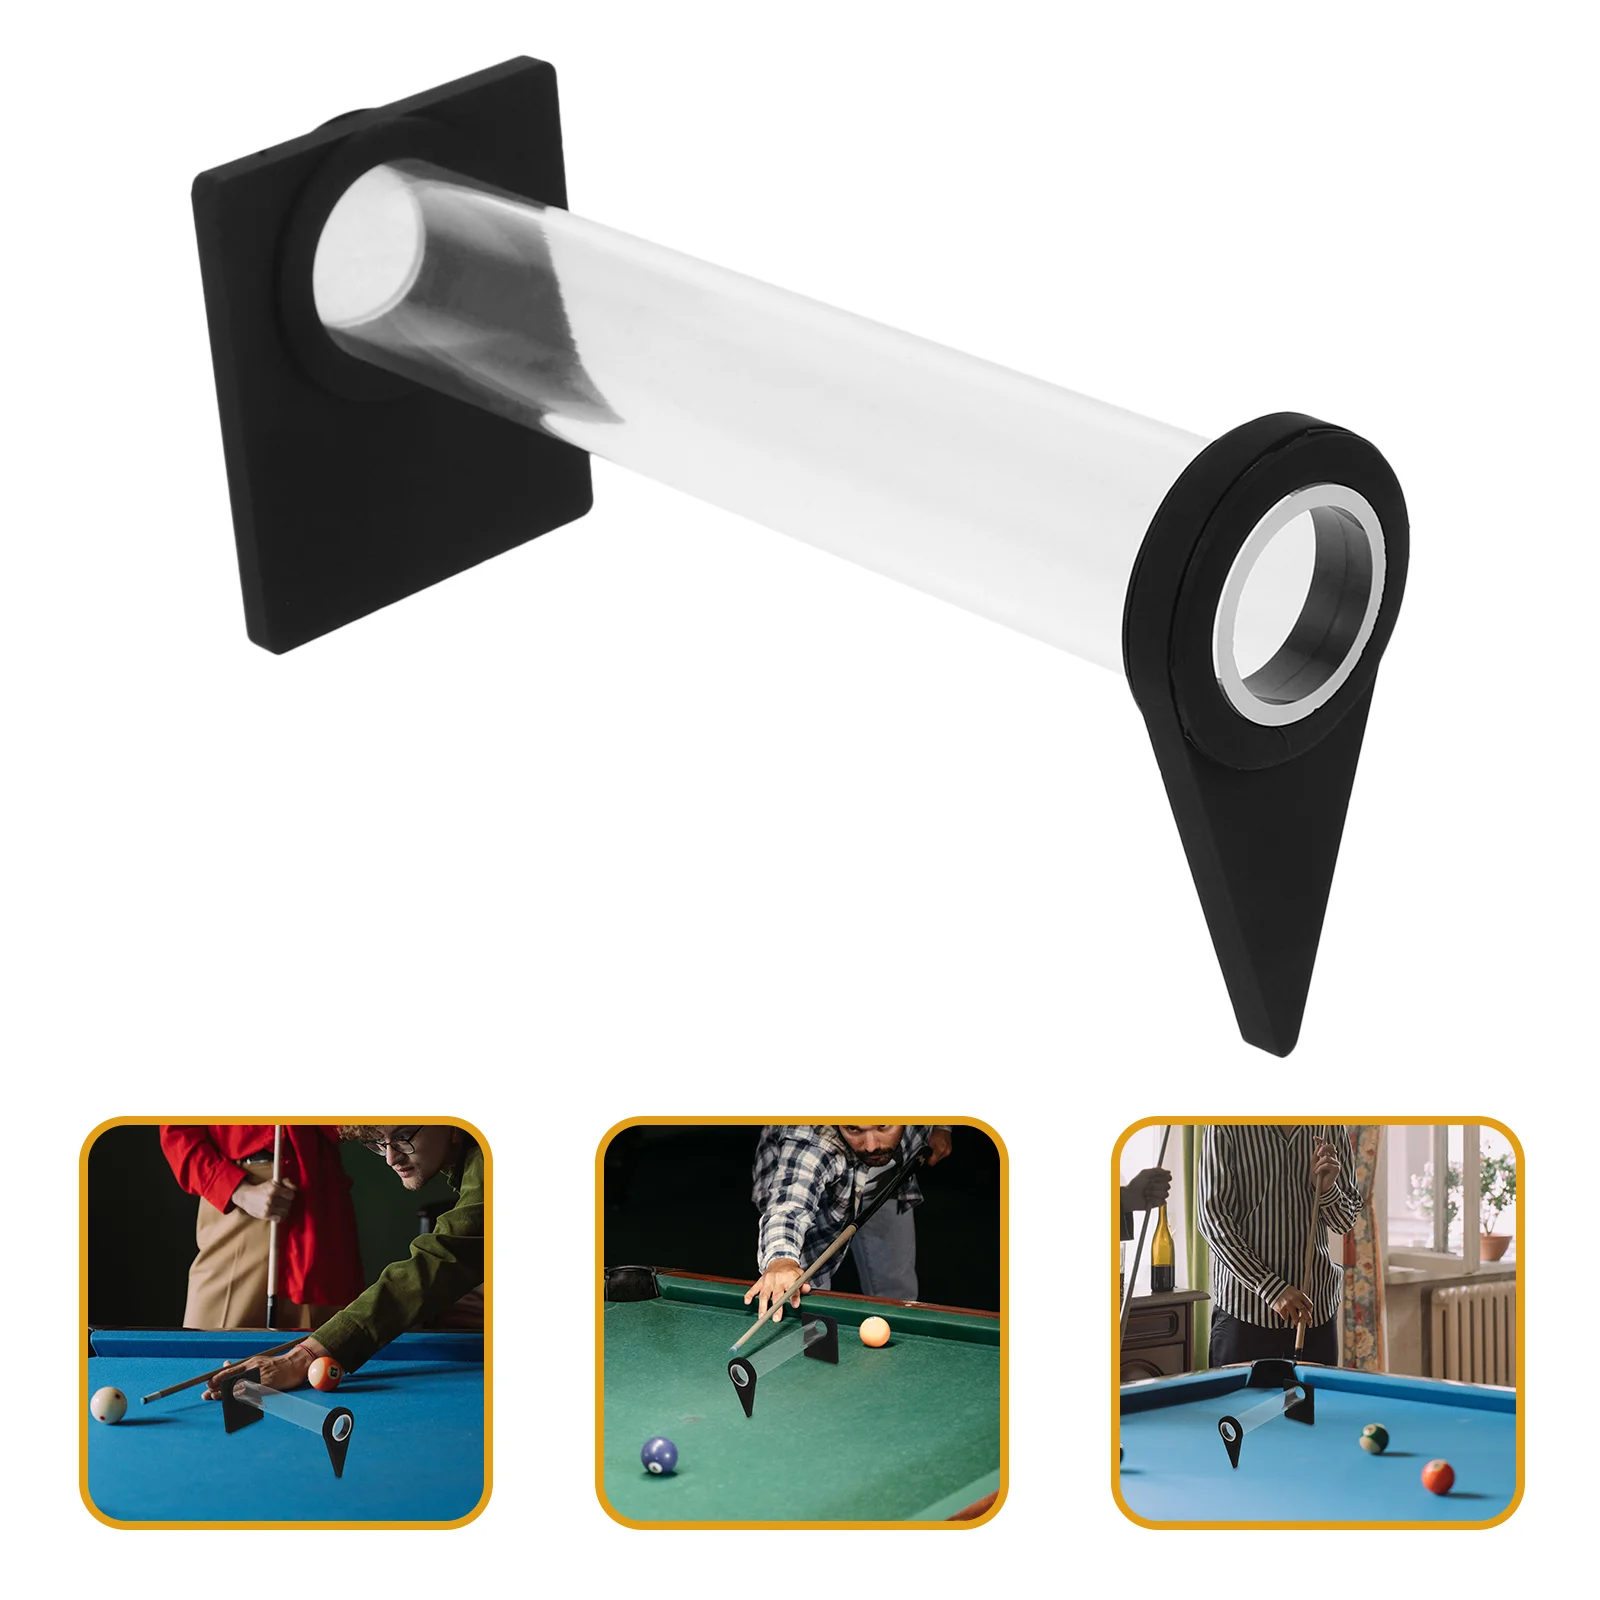 Plastic Billiard Stroke Exerciser Trainer Billiard Ball Shot Aiming Practice Tool Billiards Training Tools New adjustable soccer training belt football kick trainer solo practice training aid soccer volleyball rugby fits ball size 3 4 5